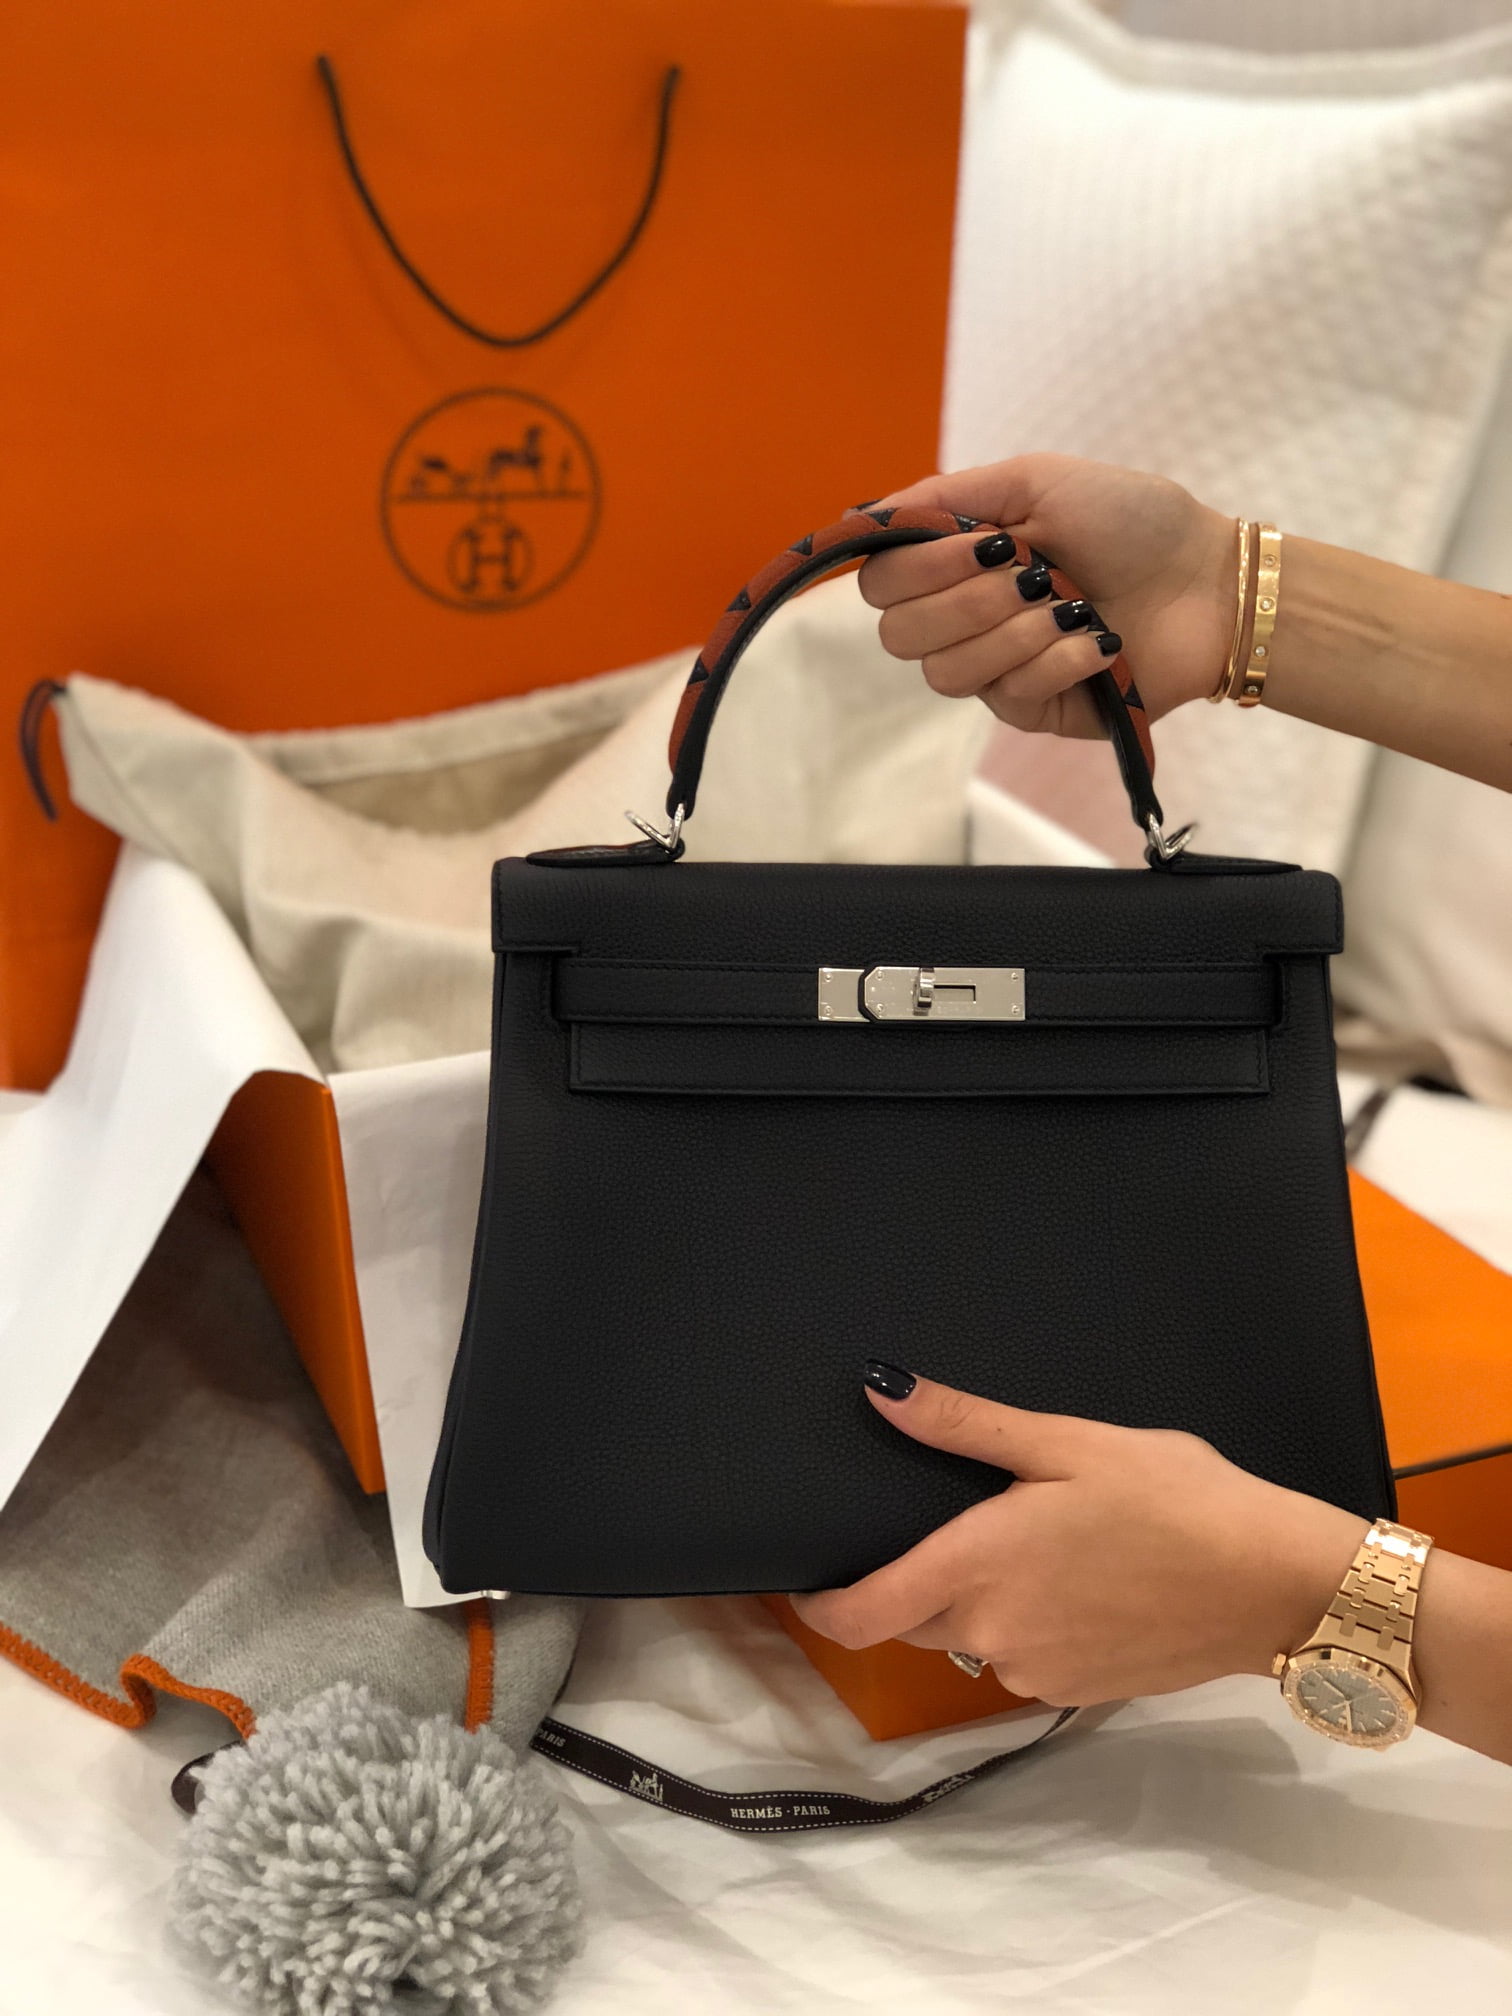 HERMES KELLY REVEAL after the SPA ( Hermes SPA Experience PART 2 ) CONS of  Kelly bag & Swift Leather 